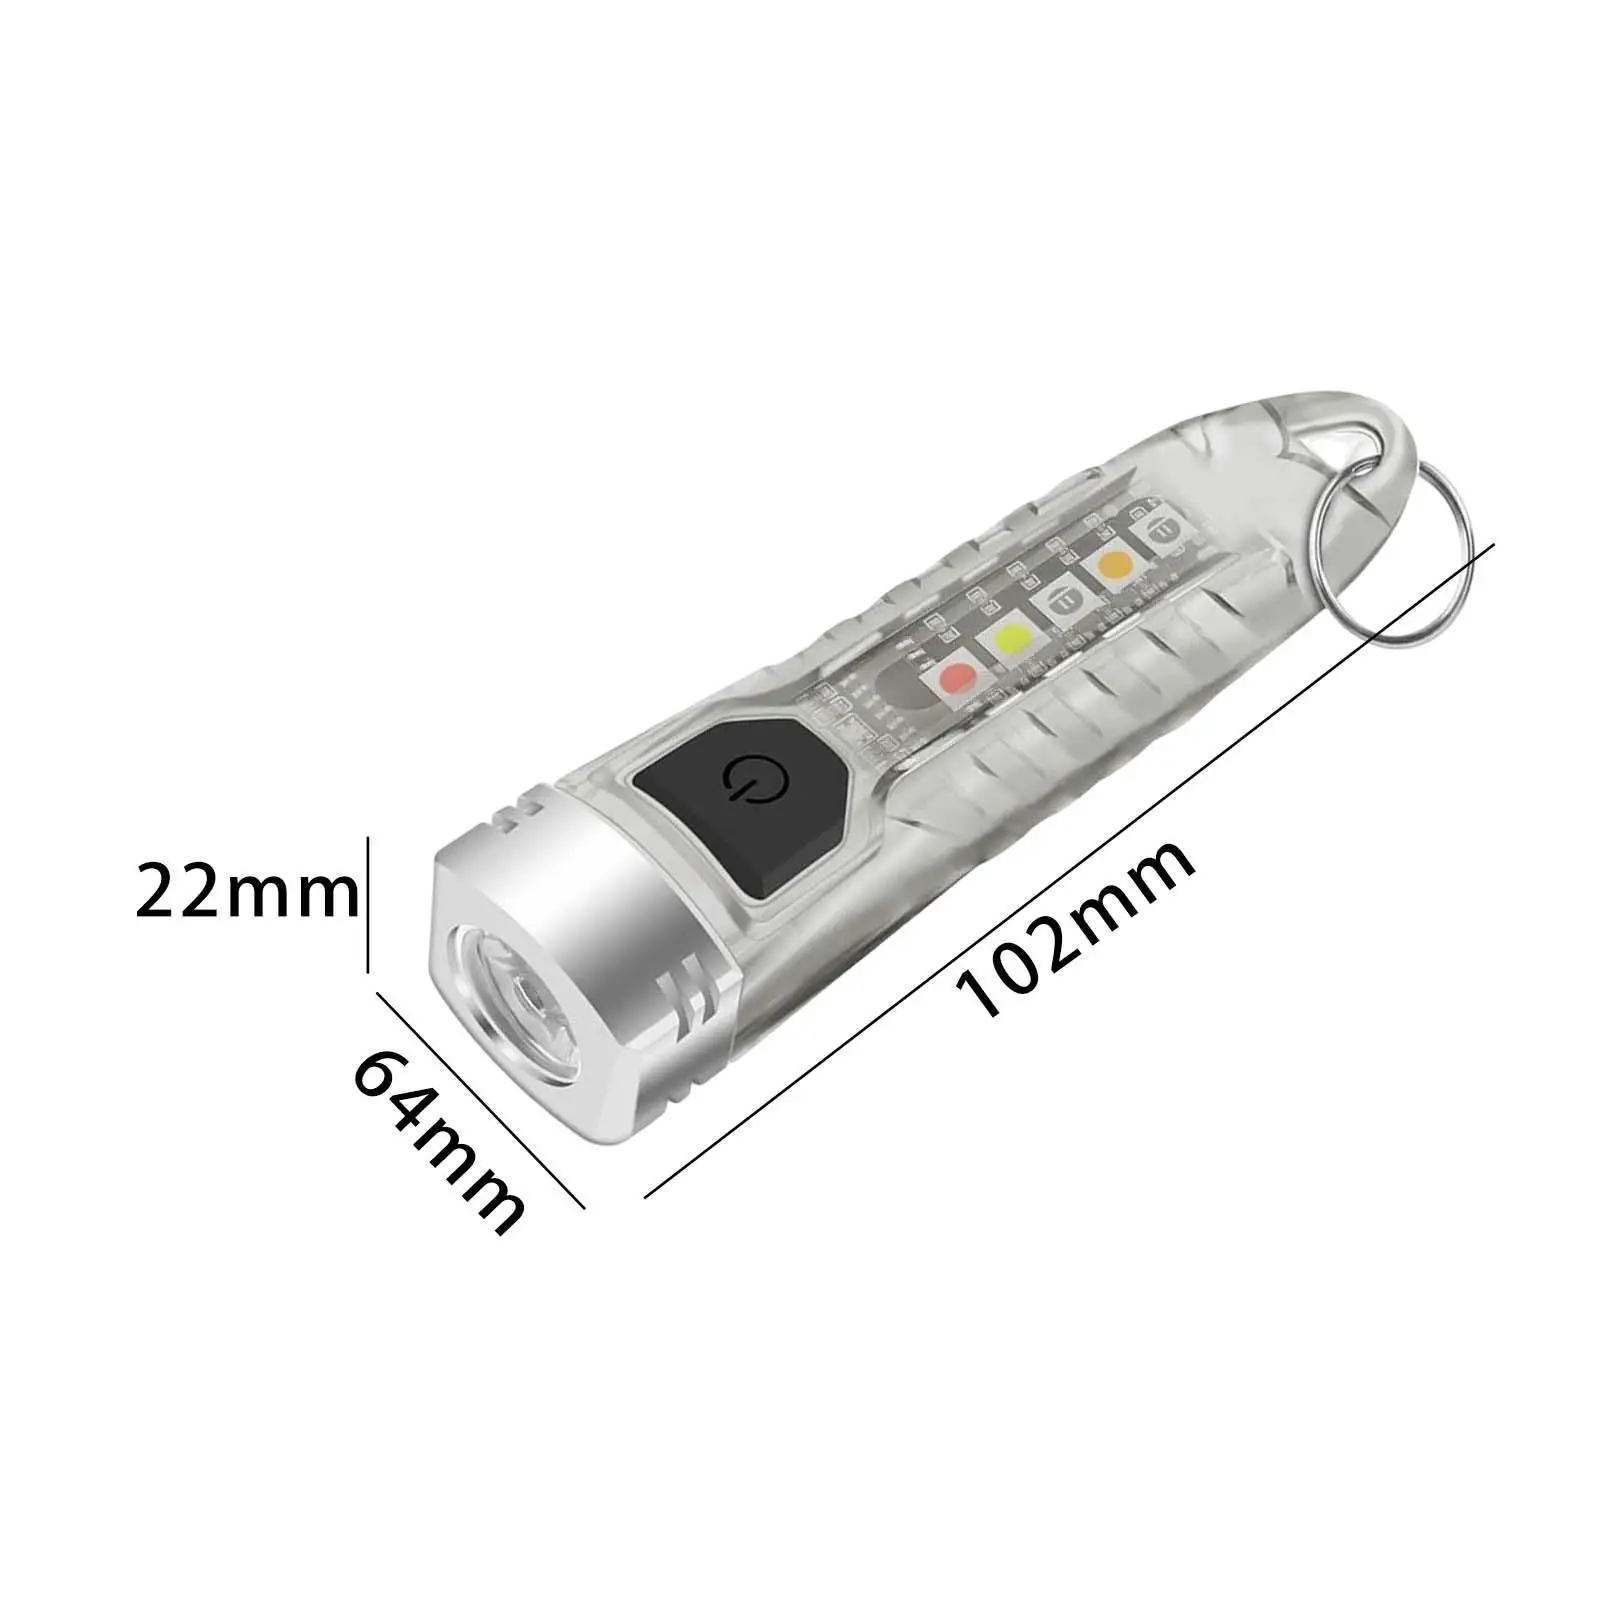 Portable Mini Flashlight with Key Chain and 12 Modes 400 Lumens LED Torch Light for Camping Hiking Daily Using Backpacking